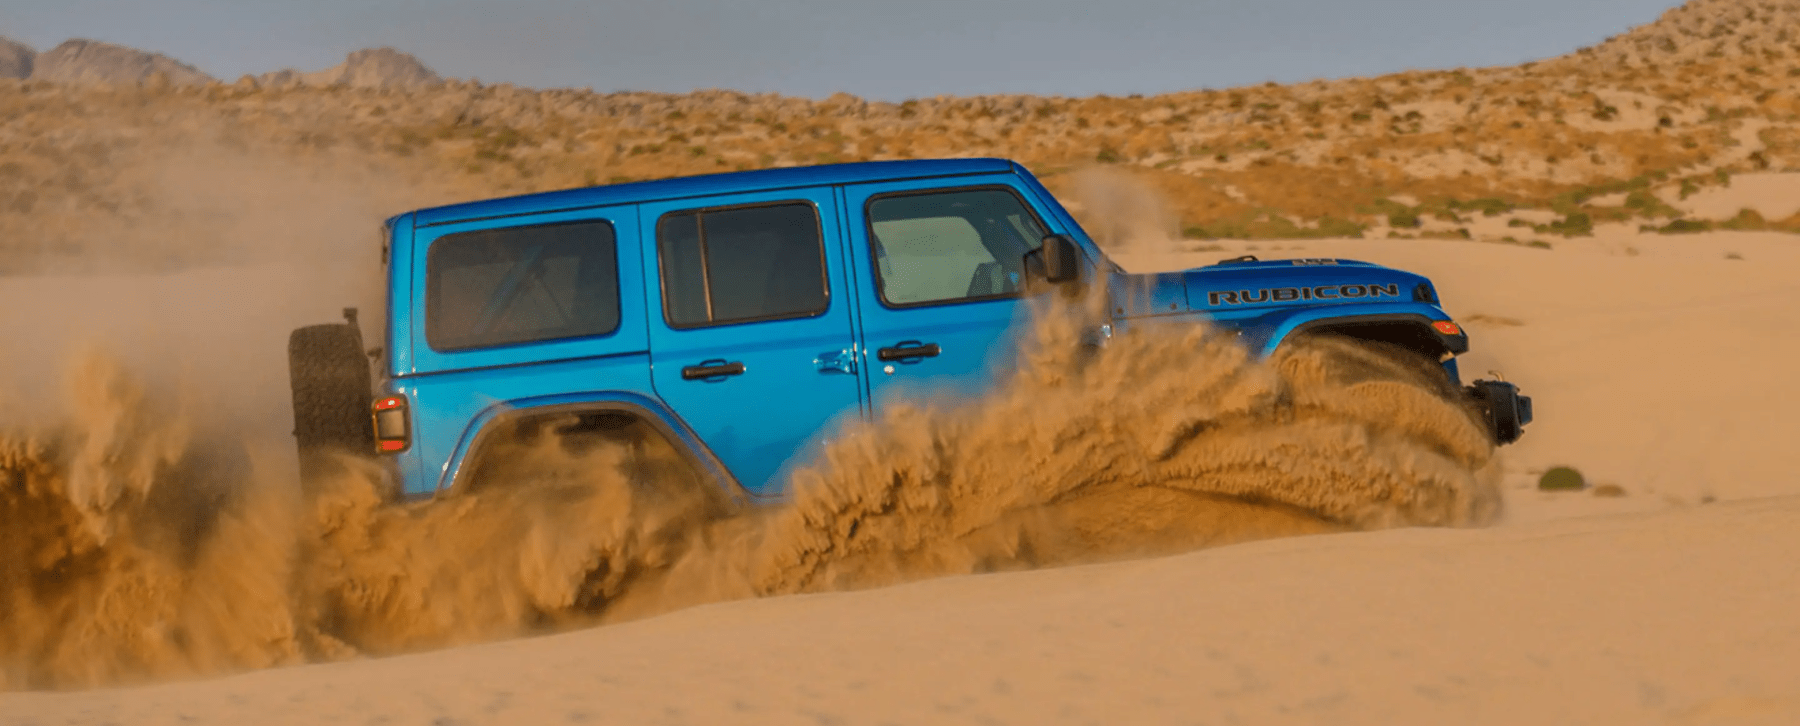 The Jeep Wrangler Rubicon 392 off-road all-terrain SUV driving through sand dunes